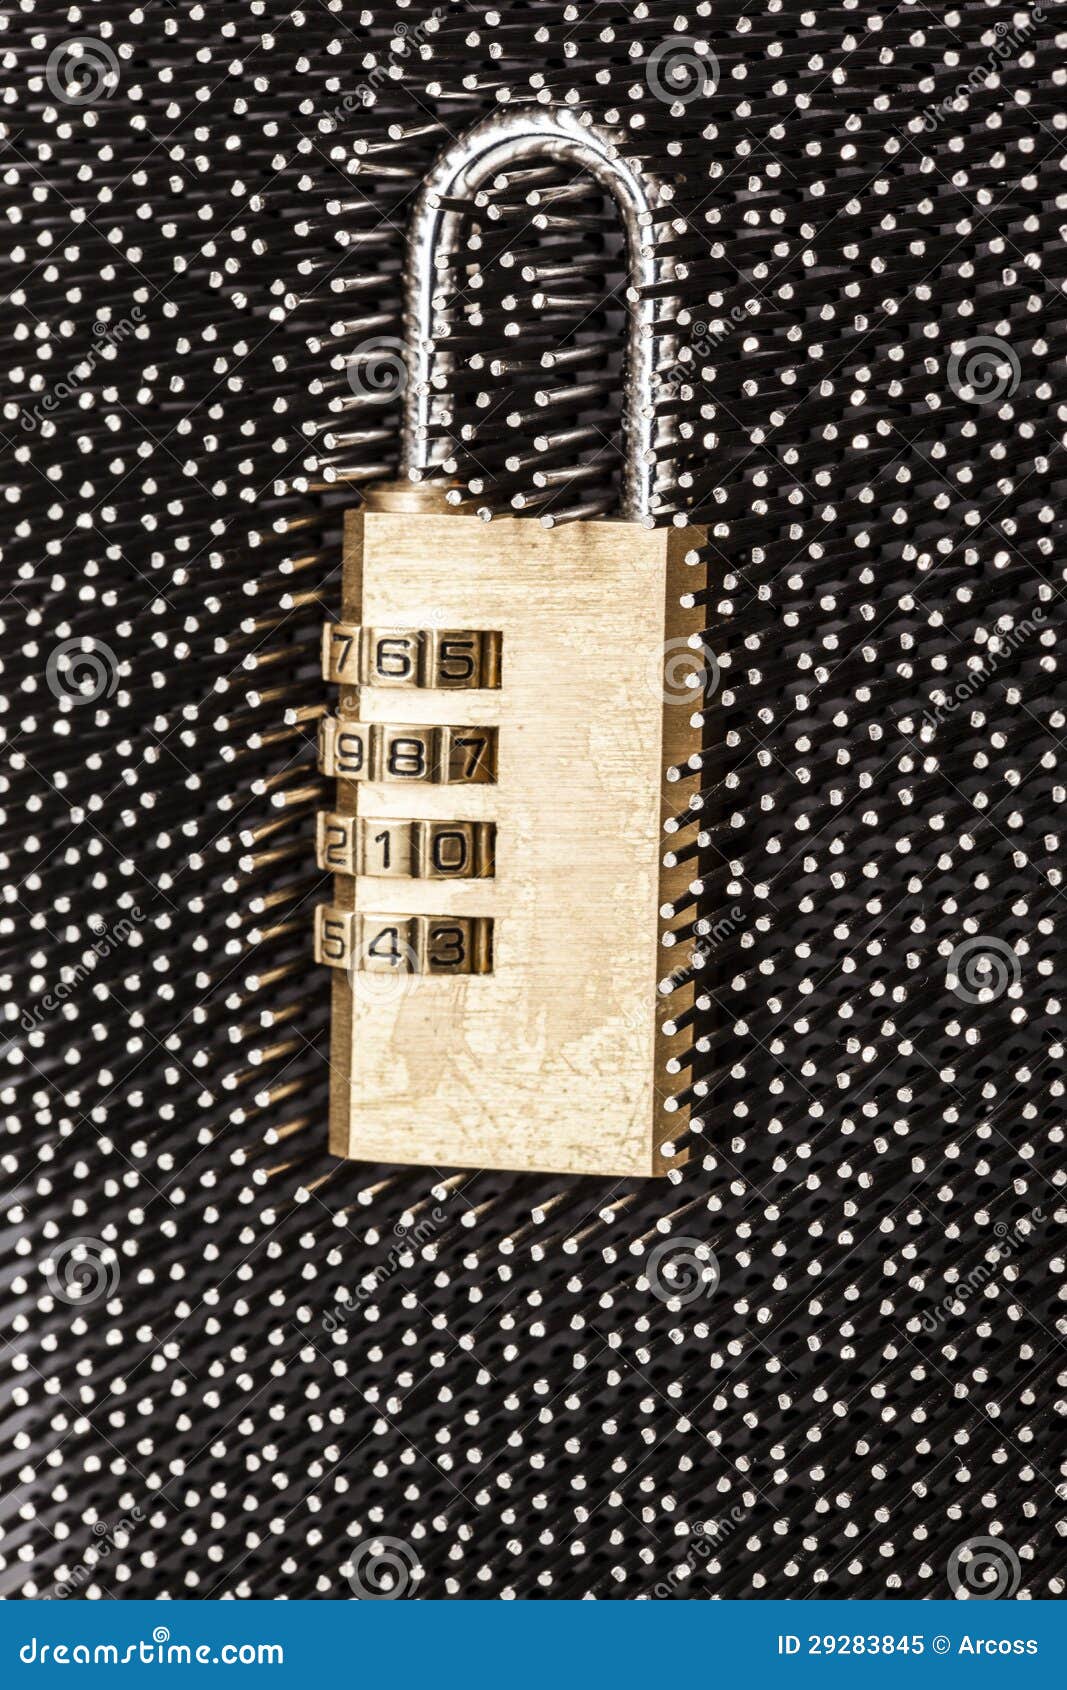 Padlock protection concept with pin